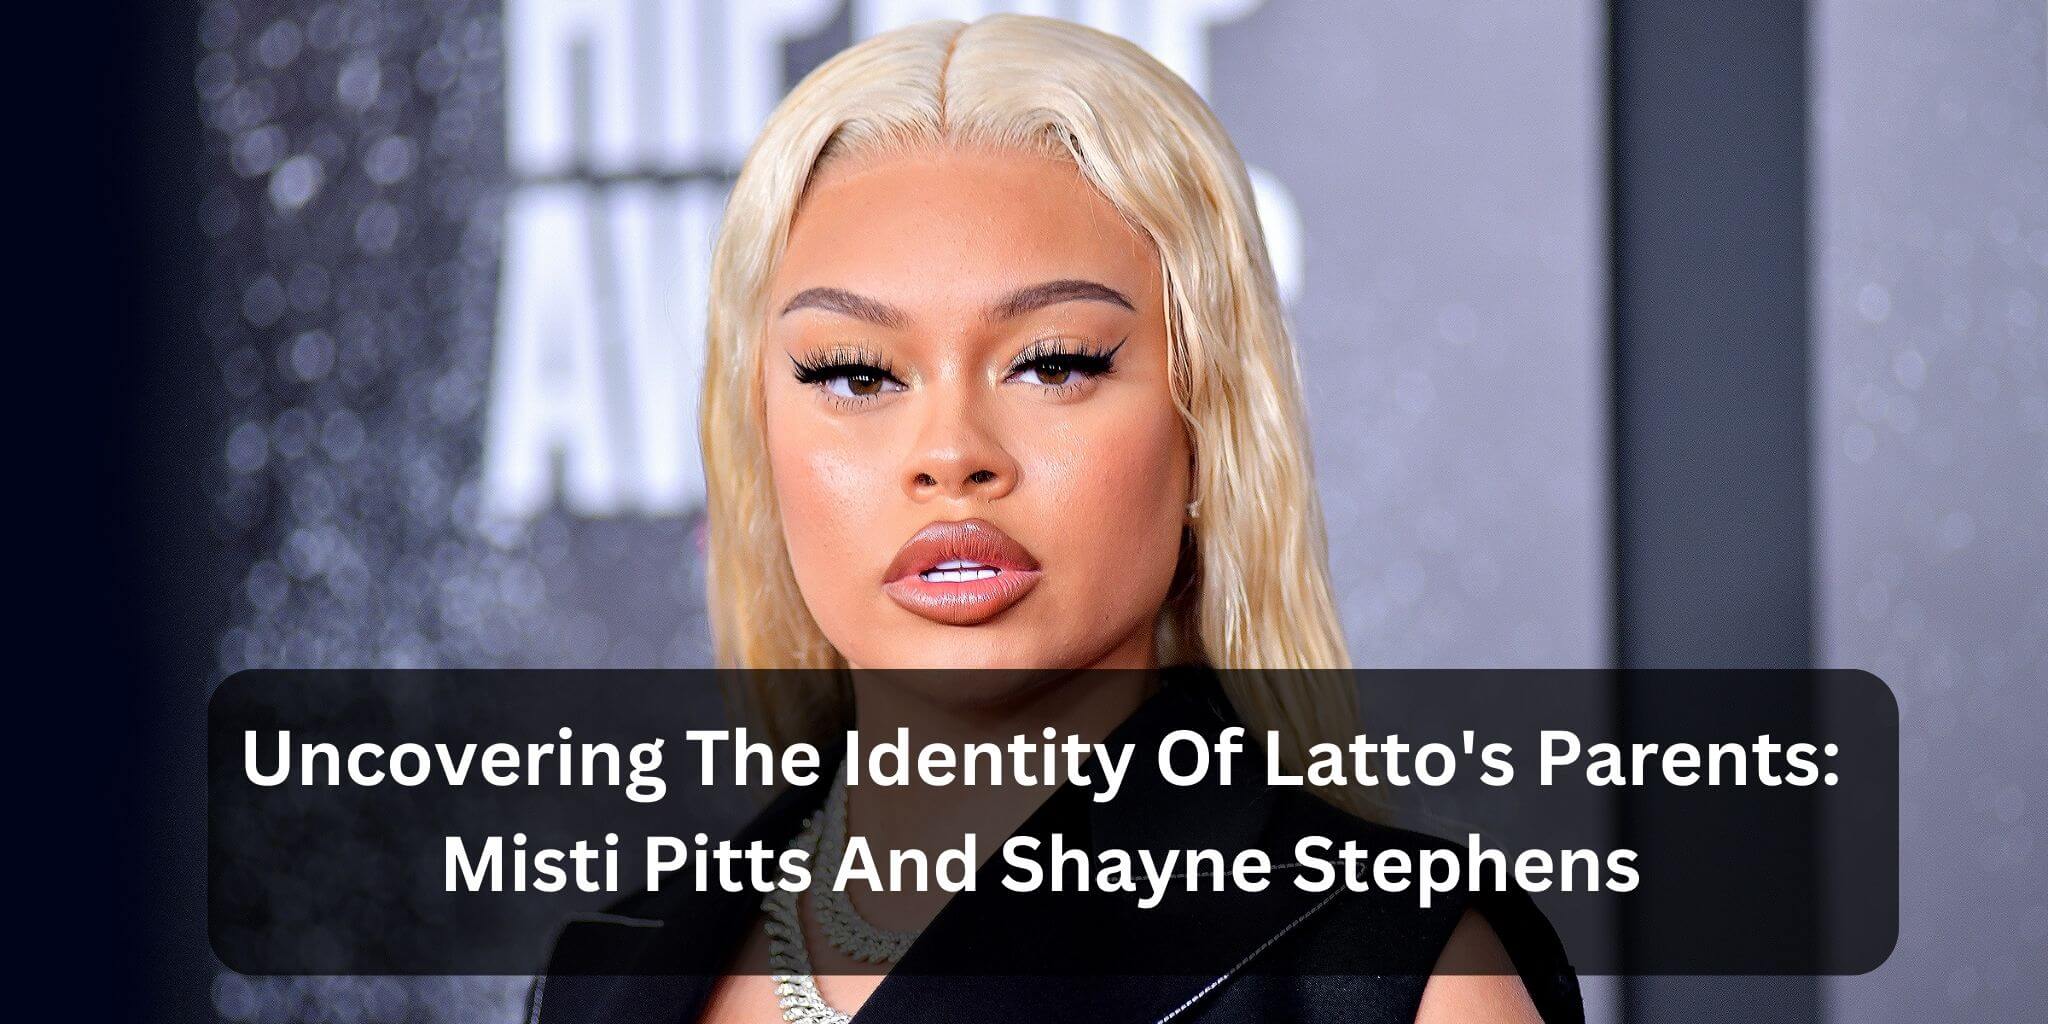 Uncovering The Identity Of Latto's Parents: Misti Pitts And Shayne Stephens